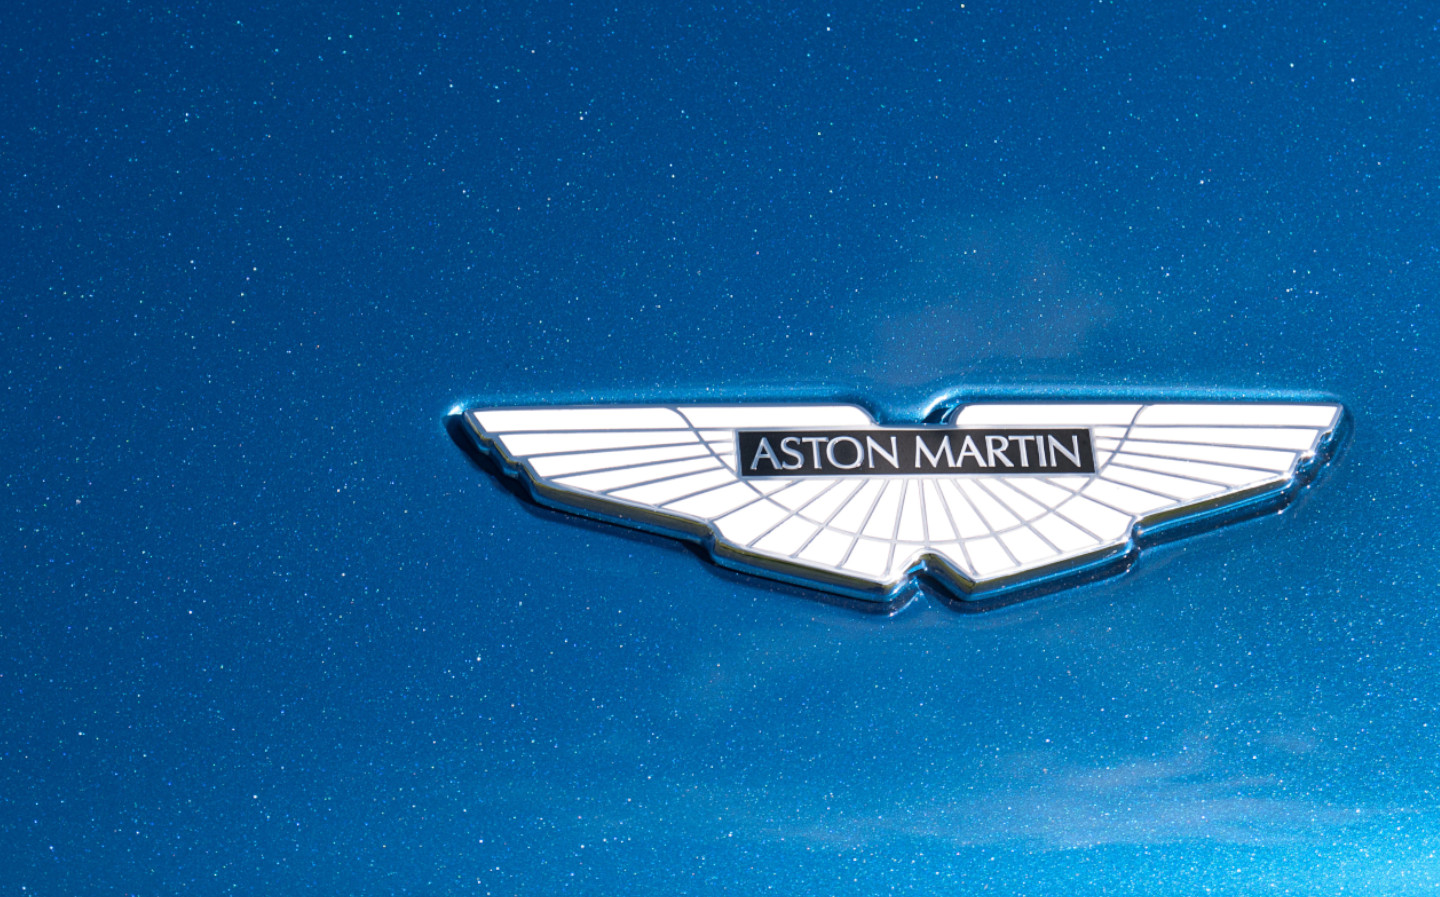 Unions concerned about Aston Martin's commitment to Wales plant